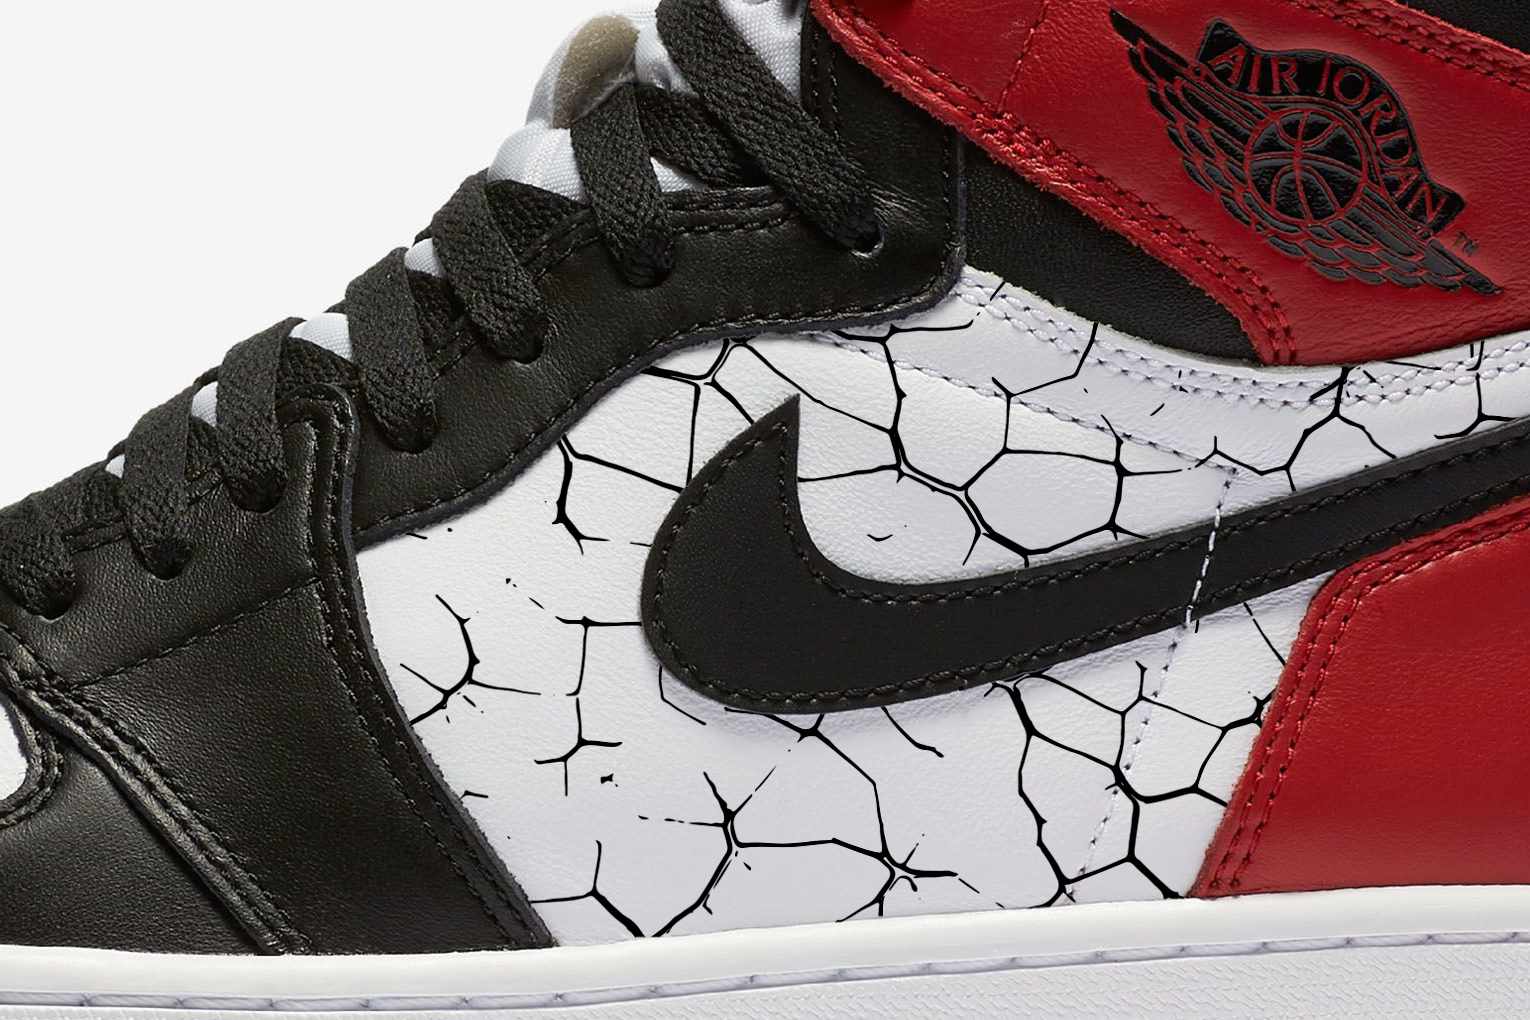 Nike's Air Jordan 1 Black Toe reimagined 2024 sneaker, with a white, red, and black distressed leather upper